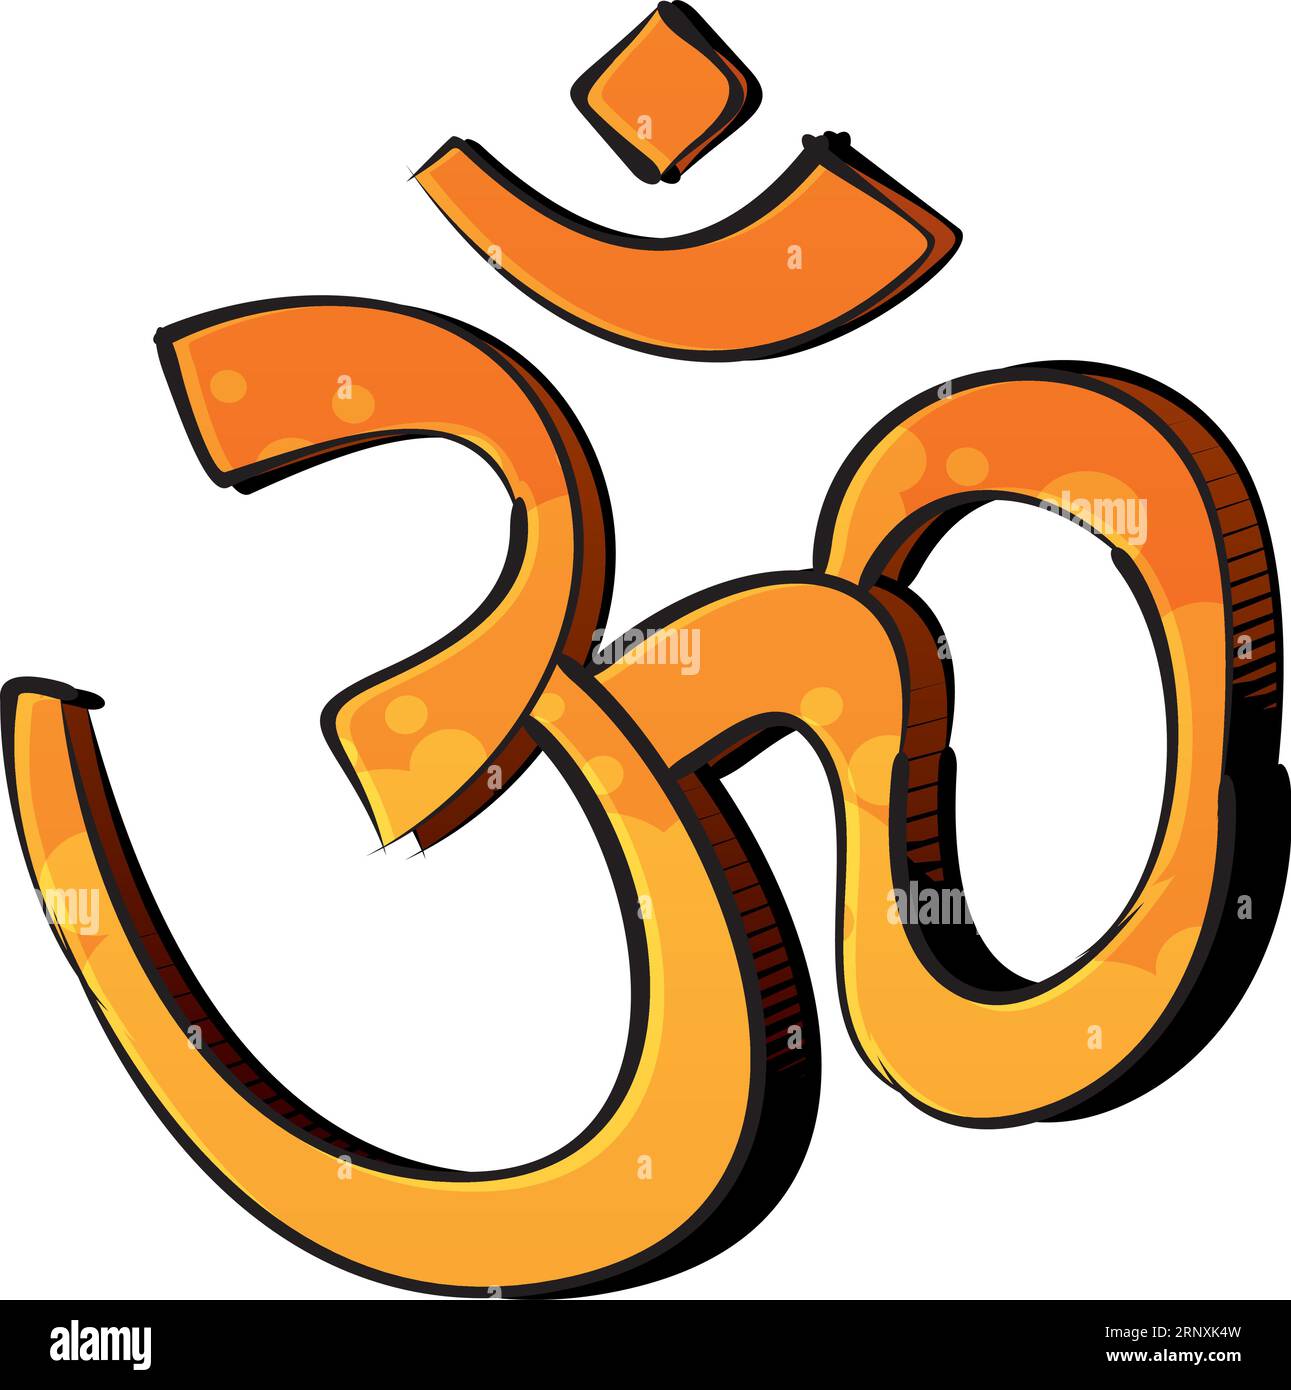 Hinduism religion symbol om created in graffiti style Stock Vector